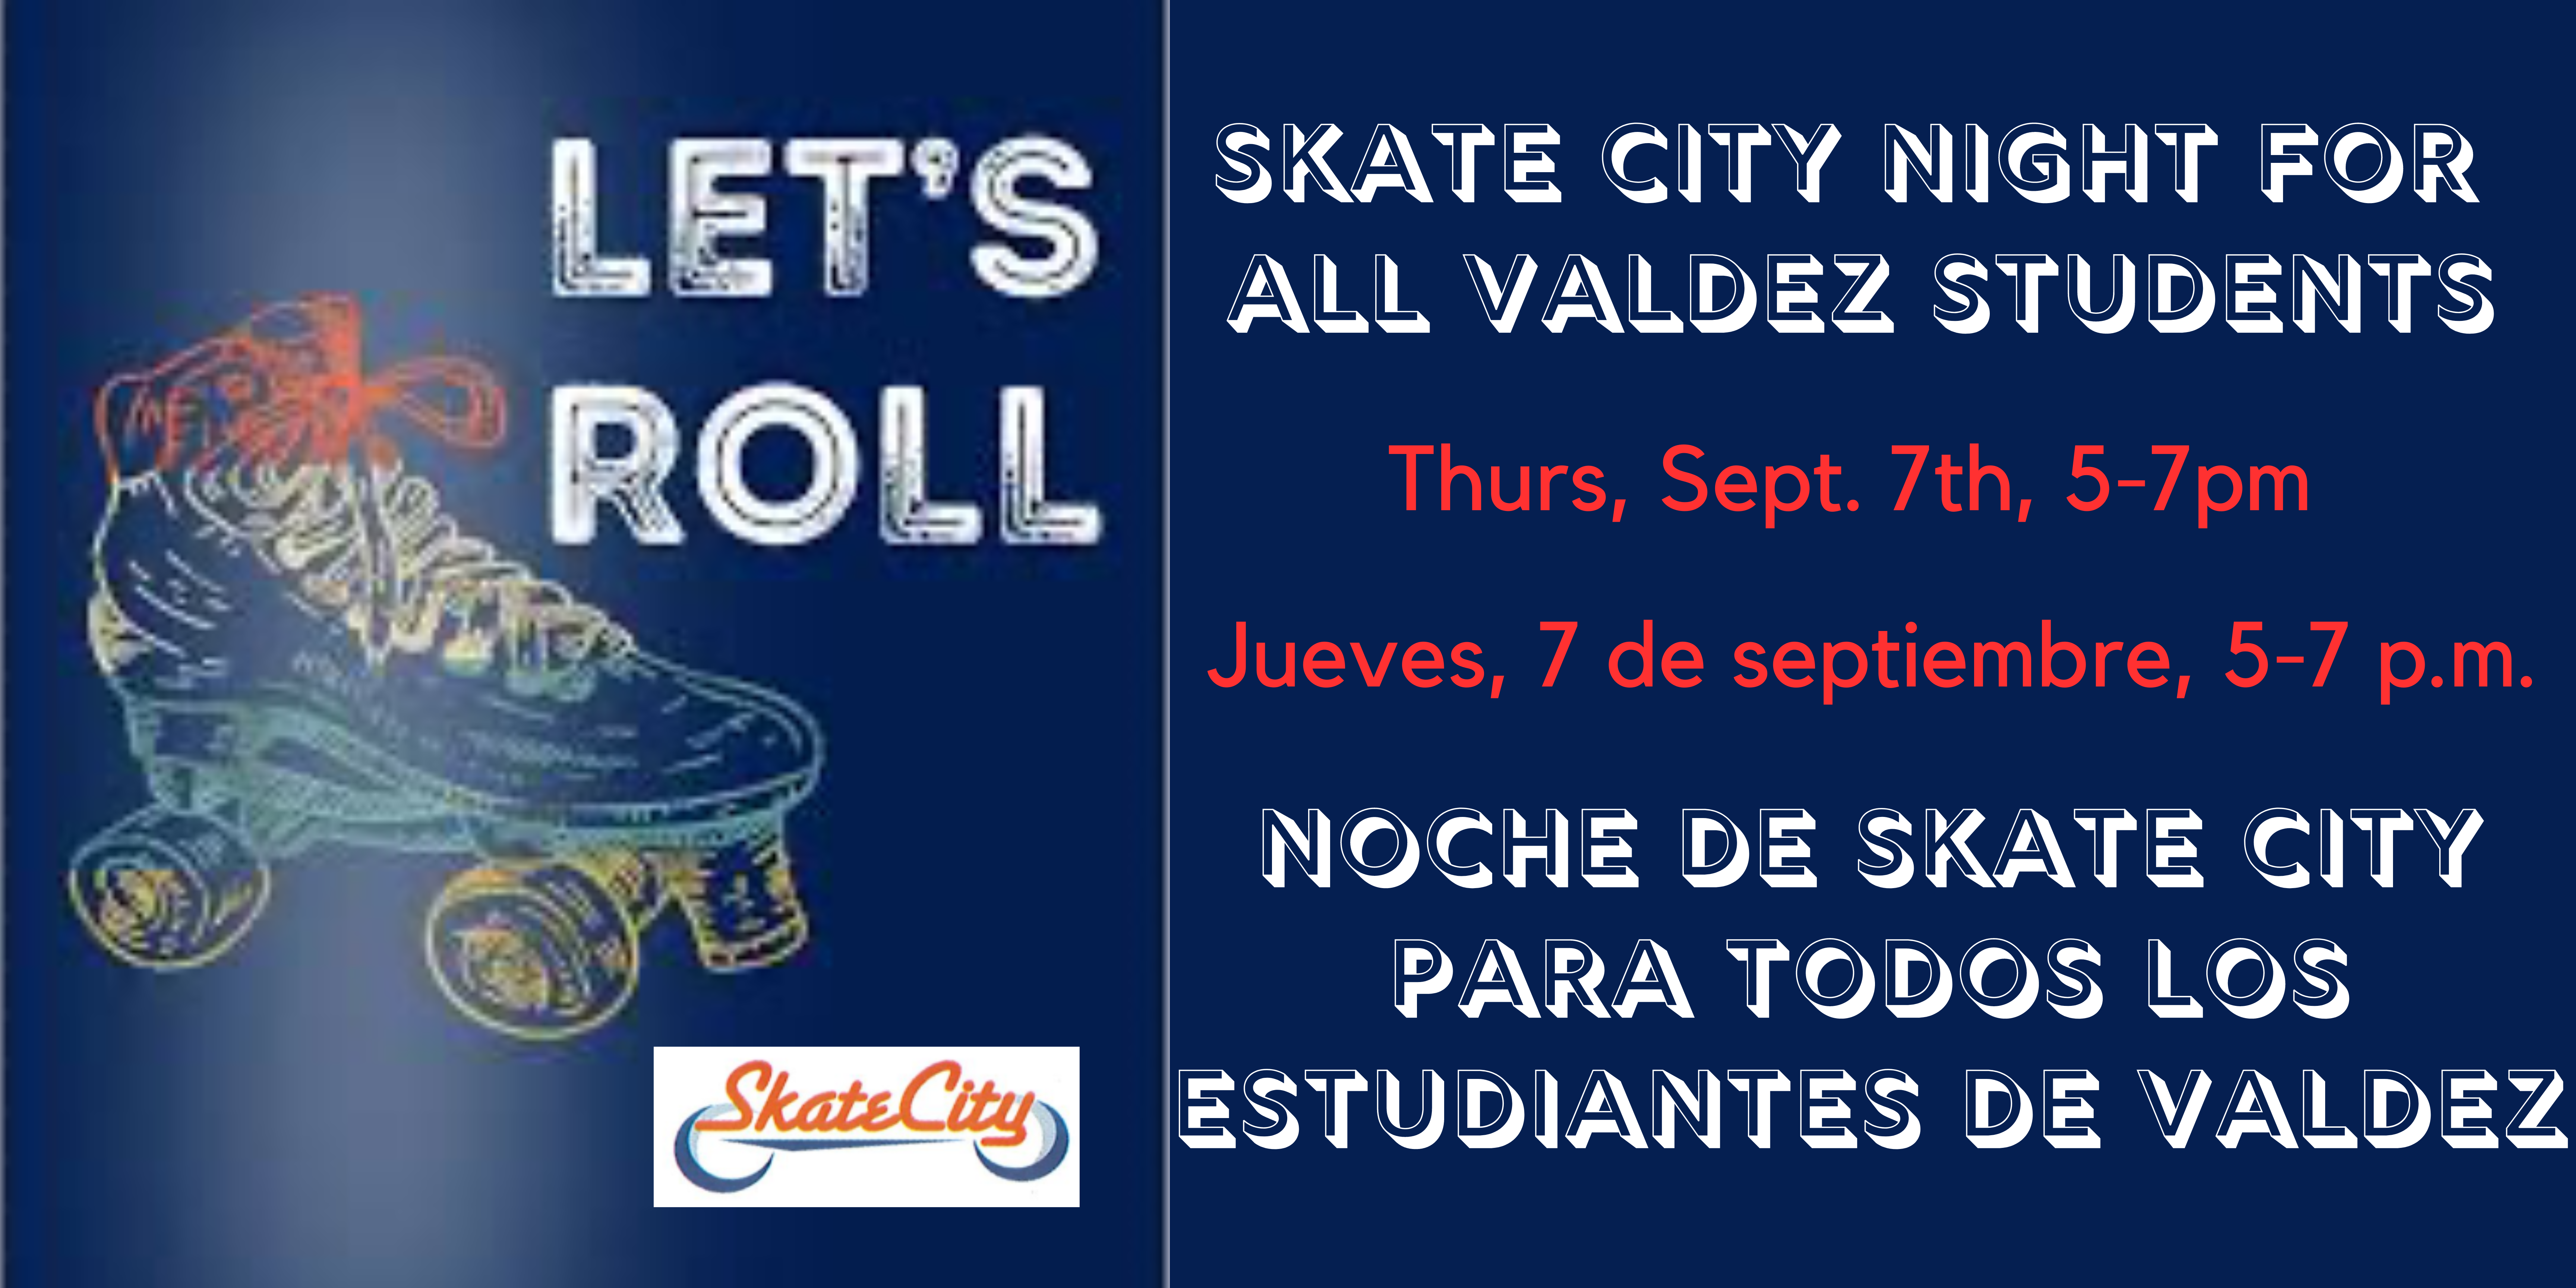 Dark blue background. Let side shows a graphic of a roller skate outlined in white with white text saying, "Let's roll." Right side in white text says, "Skate City Party for All Valdez Students" and in red text, "Thursday, September 7, 5-7 p.m."